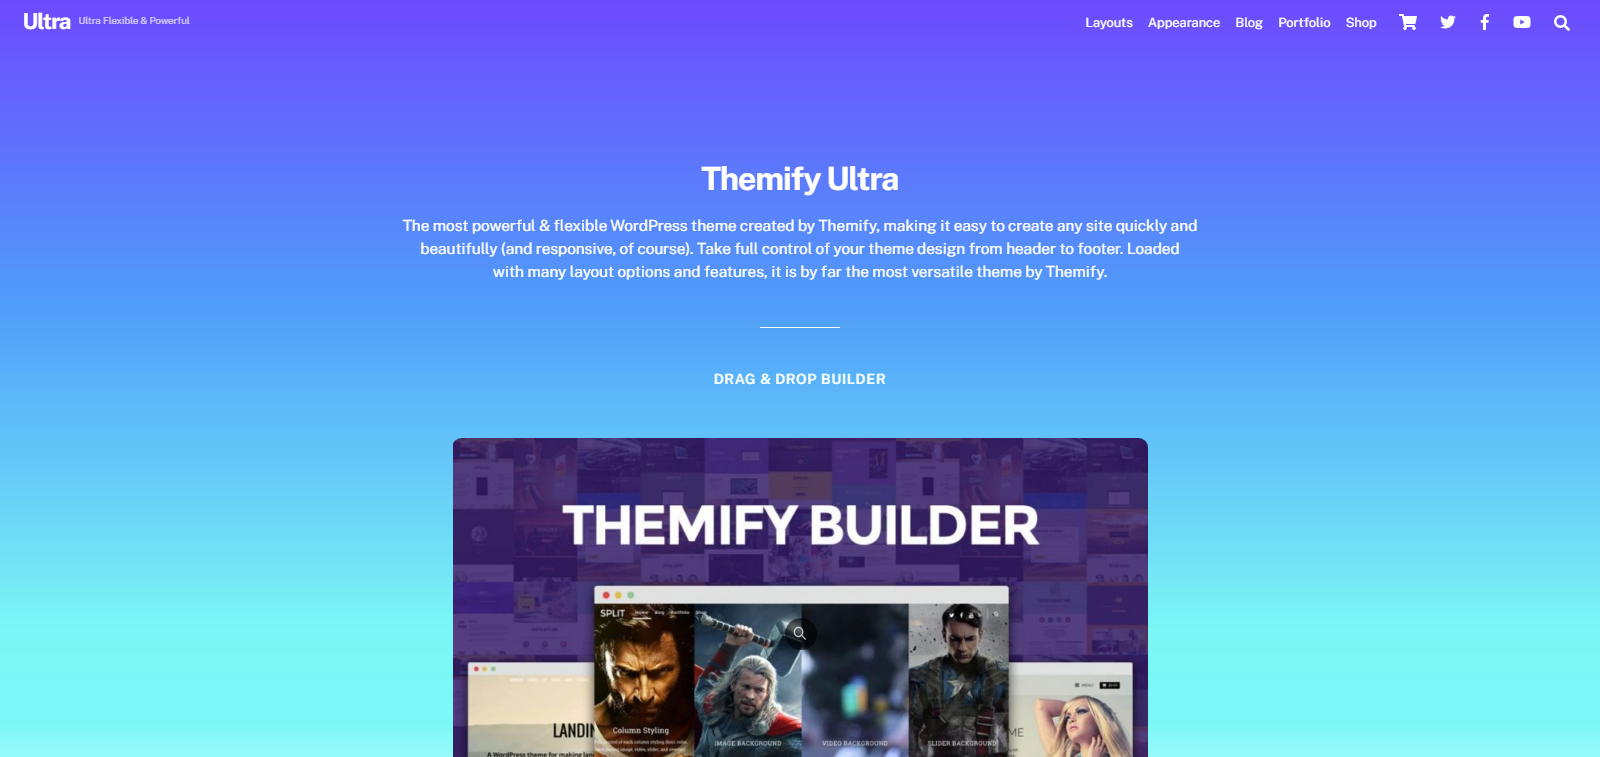 C:UsersTaggBoxDownloadsUltra – theme.png